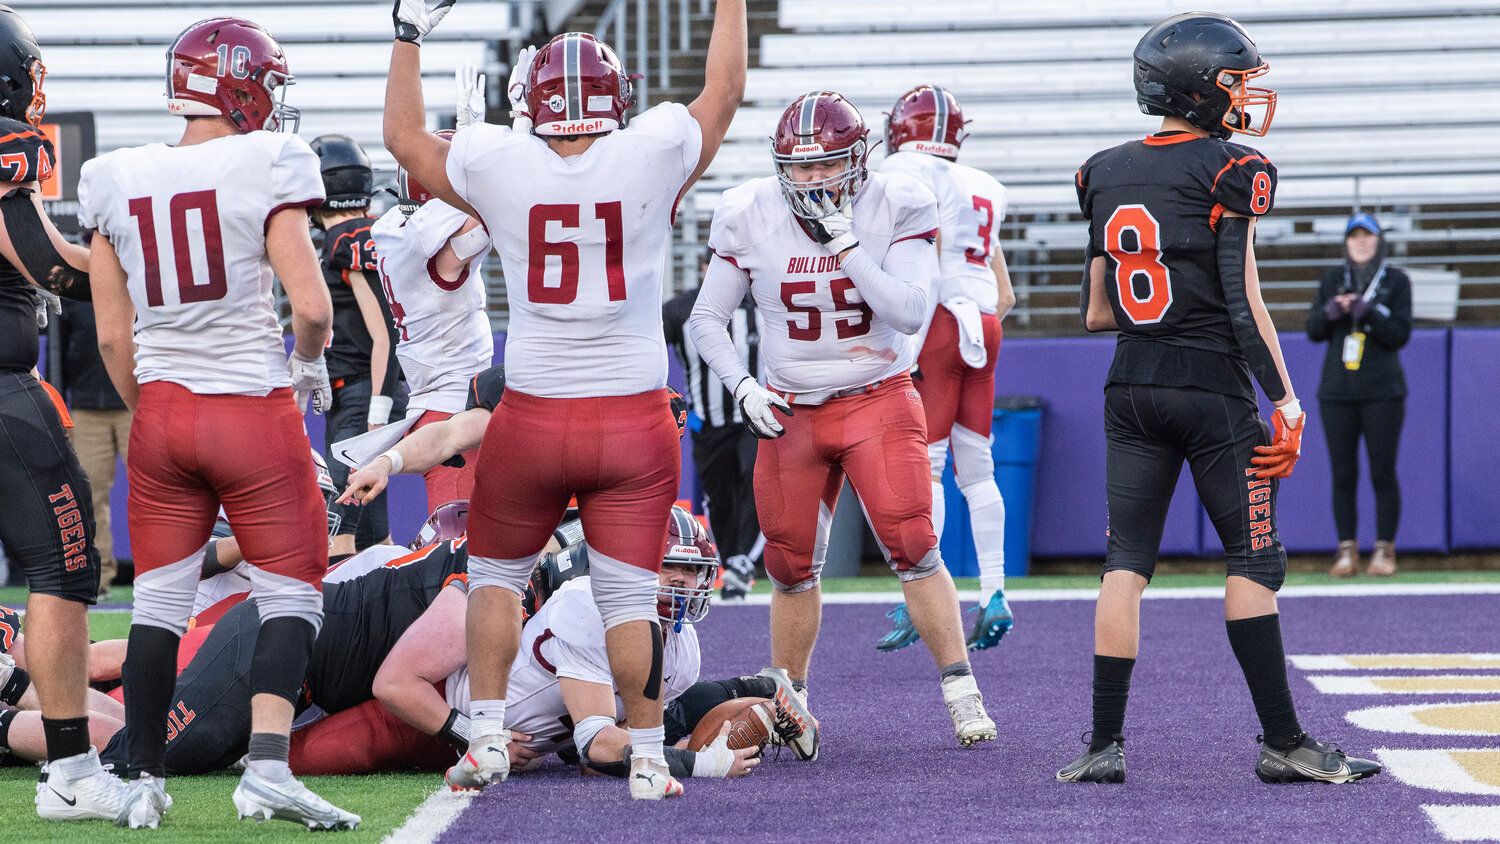 Okanogan’s Leo Cardenas celebrates as the Bulldogs score a touchdown in a matchup against Napavine for the 2B State Championship at Husky Stadium on Saturday, Dec. 2.